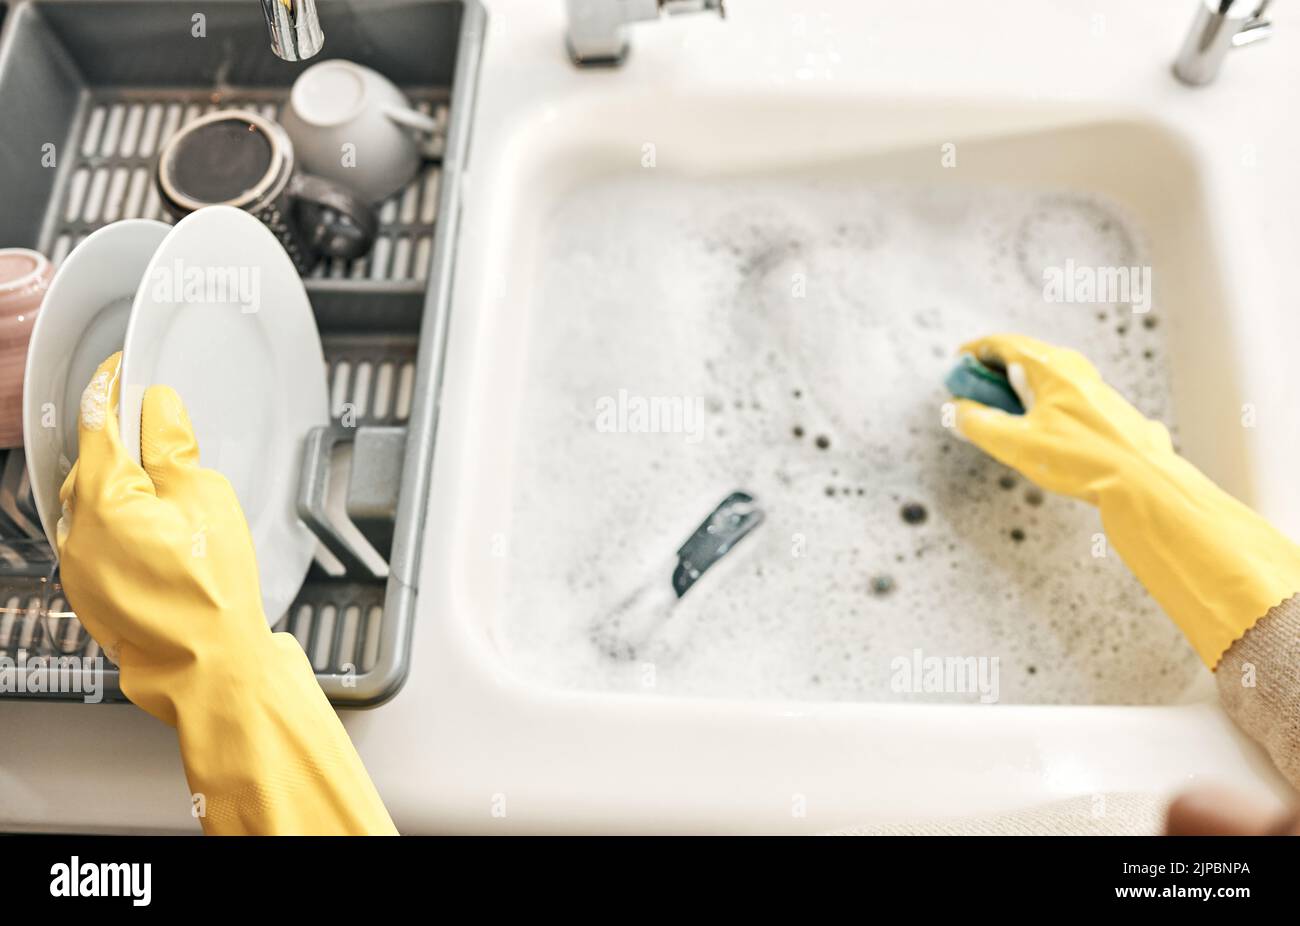 Housewife, maid or cleaner hands washing dishes in the kitchen sink for home hygiene, wearing rubber gloves. Contact us for cleaning solutions or Stock Photo